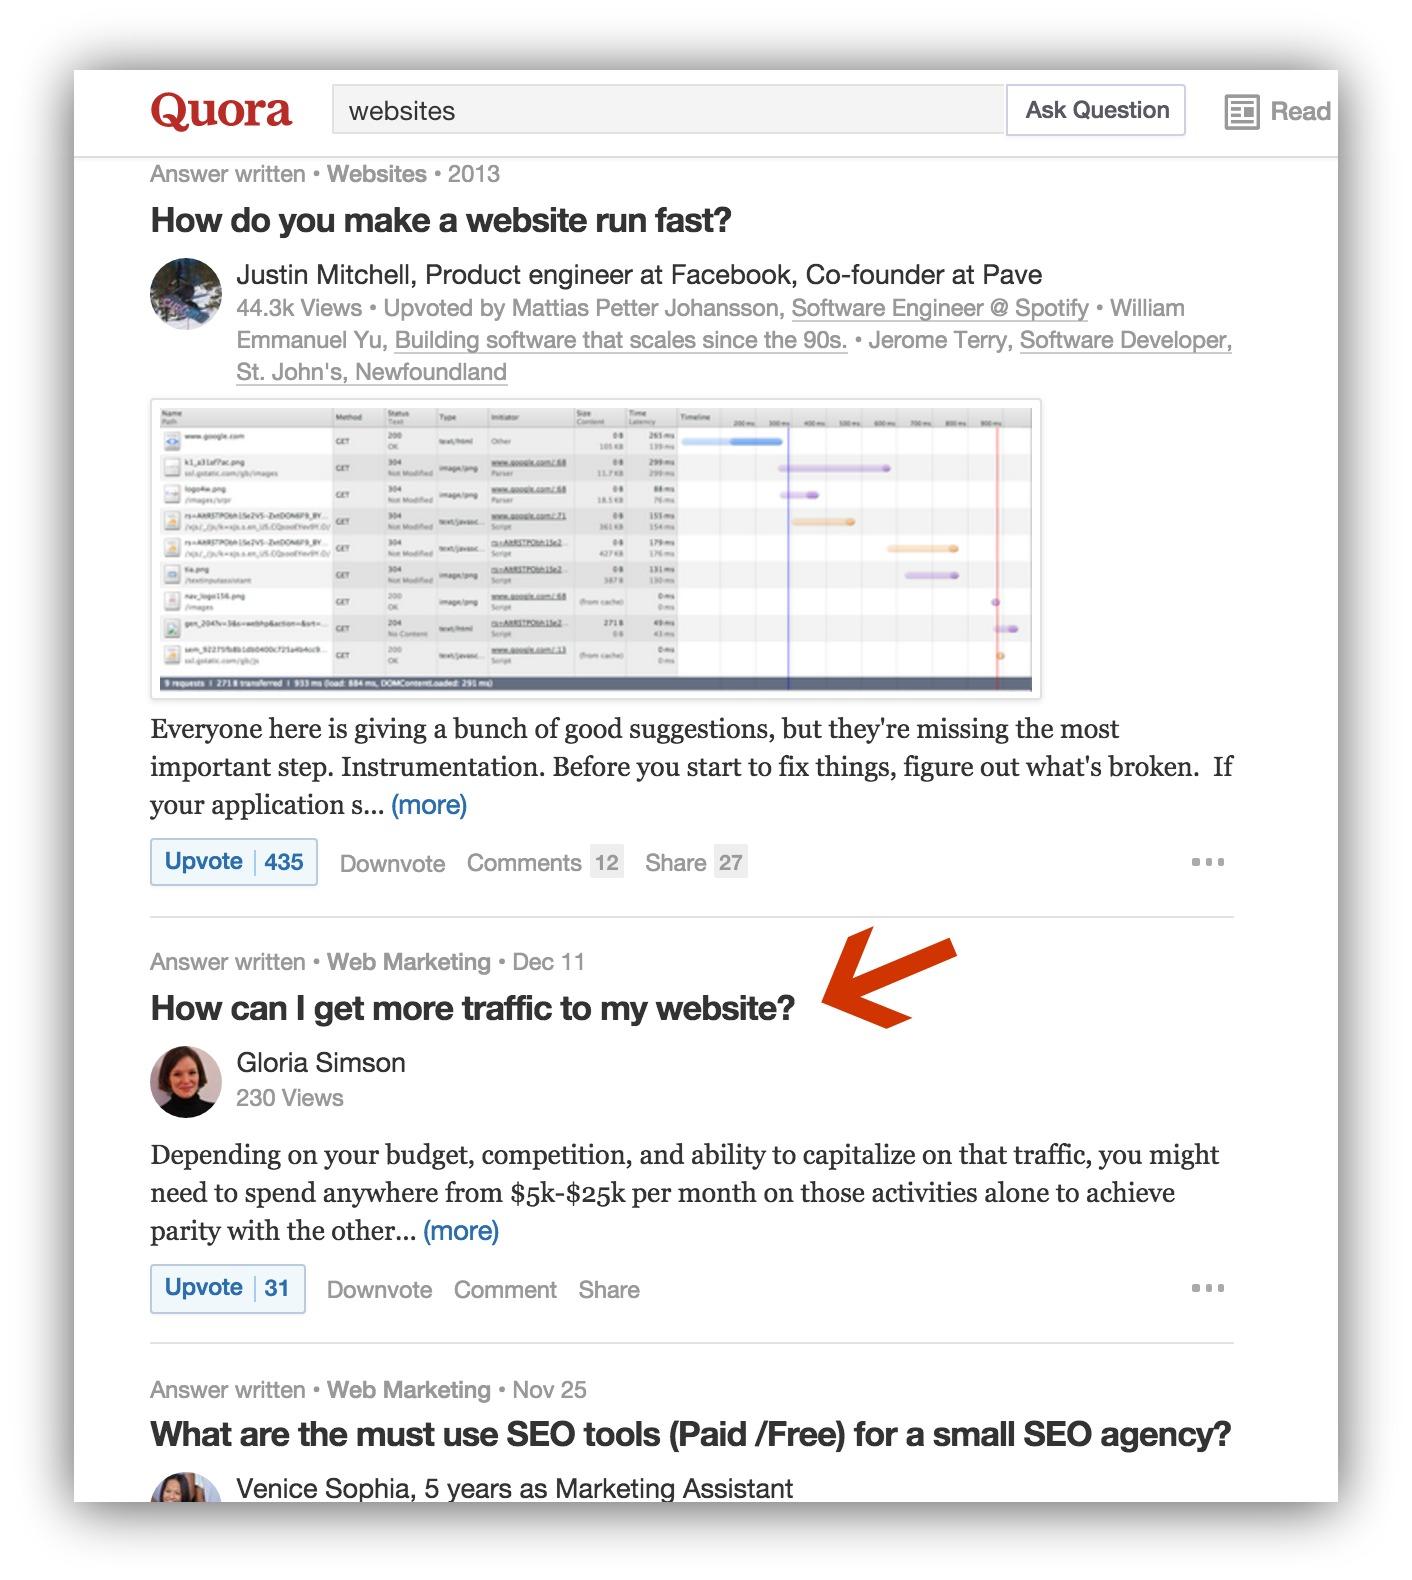 Screenshot showing questions on Quora, and a question about getting traffic